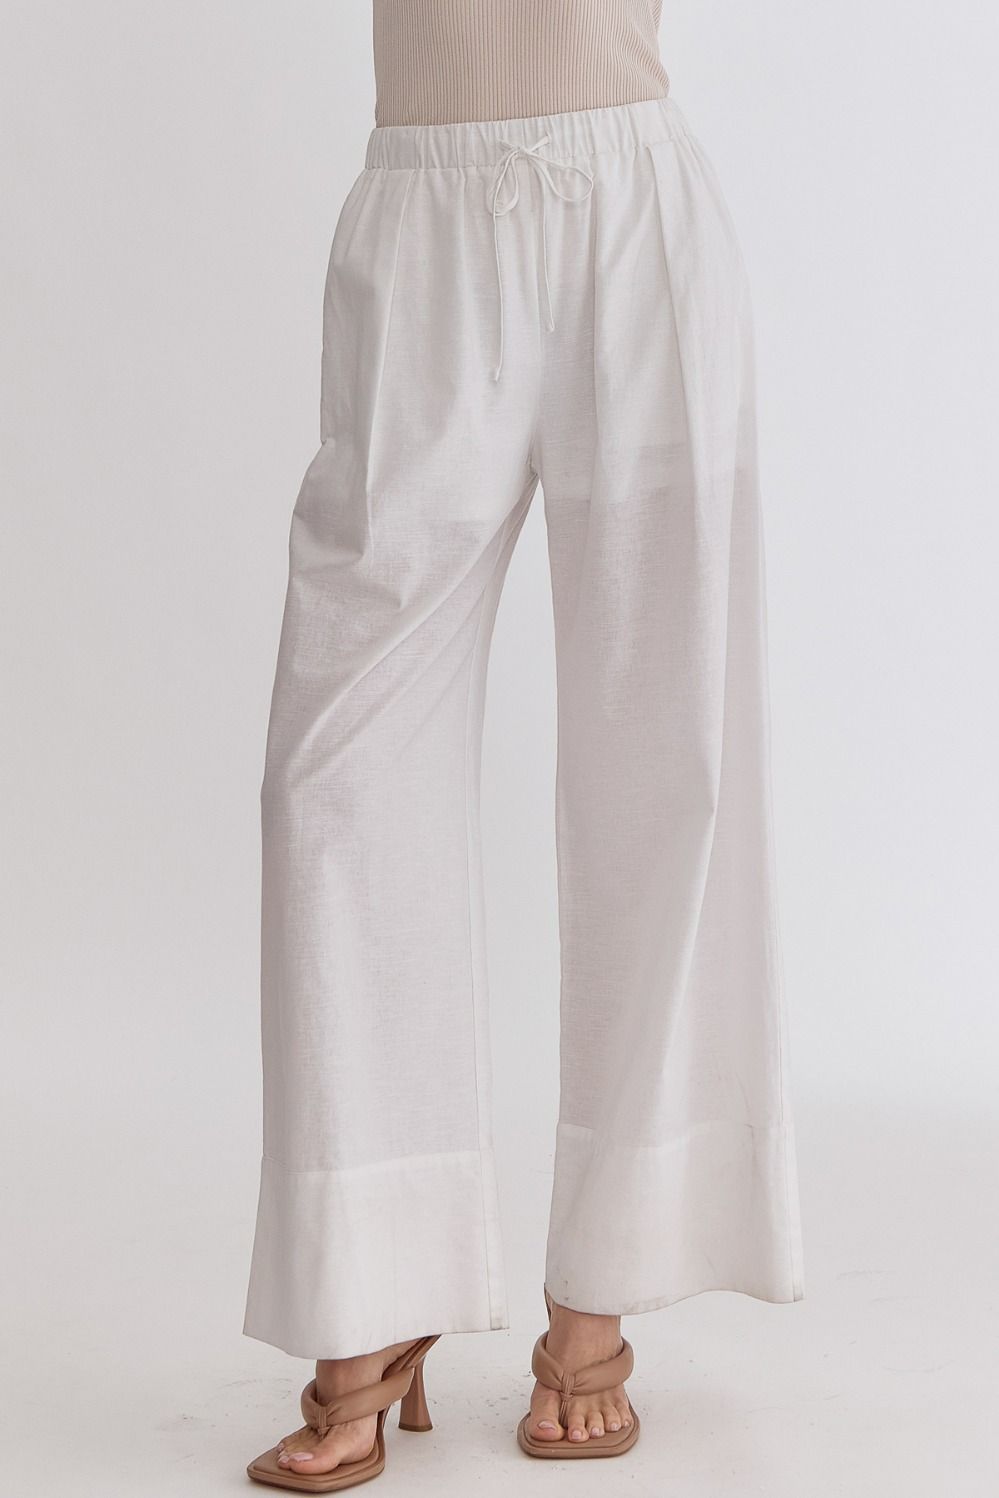 Classic Solid High Waisted Wide Leg Linen Drawstring Waist Pant - White